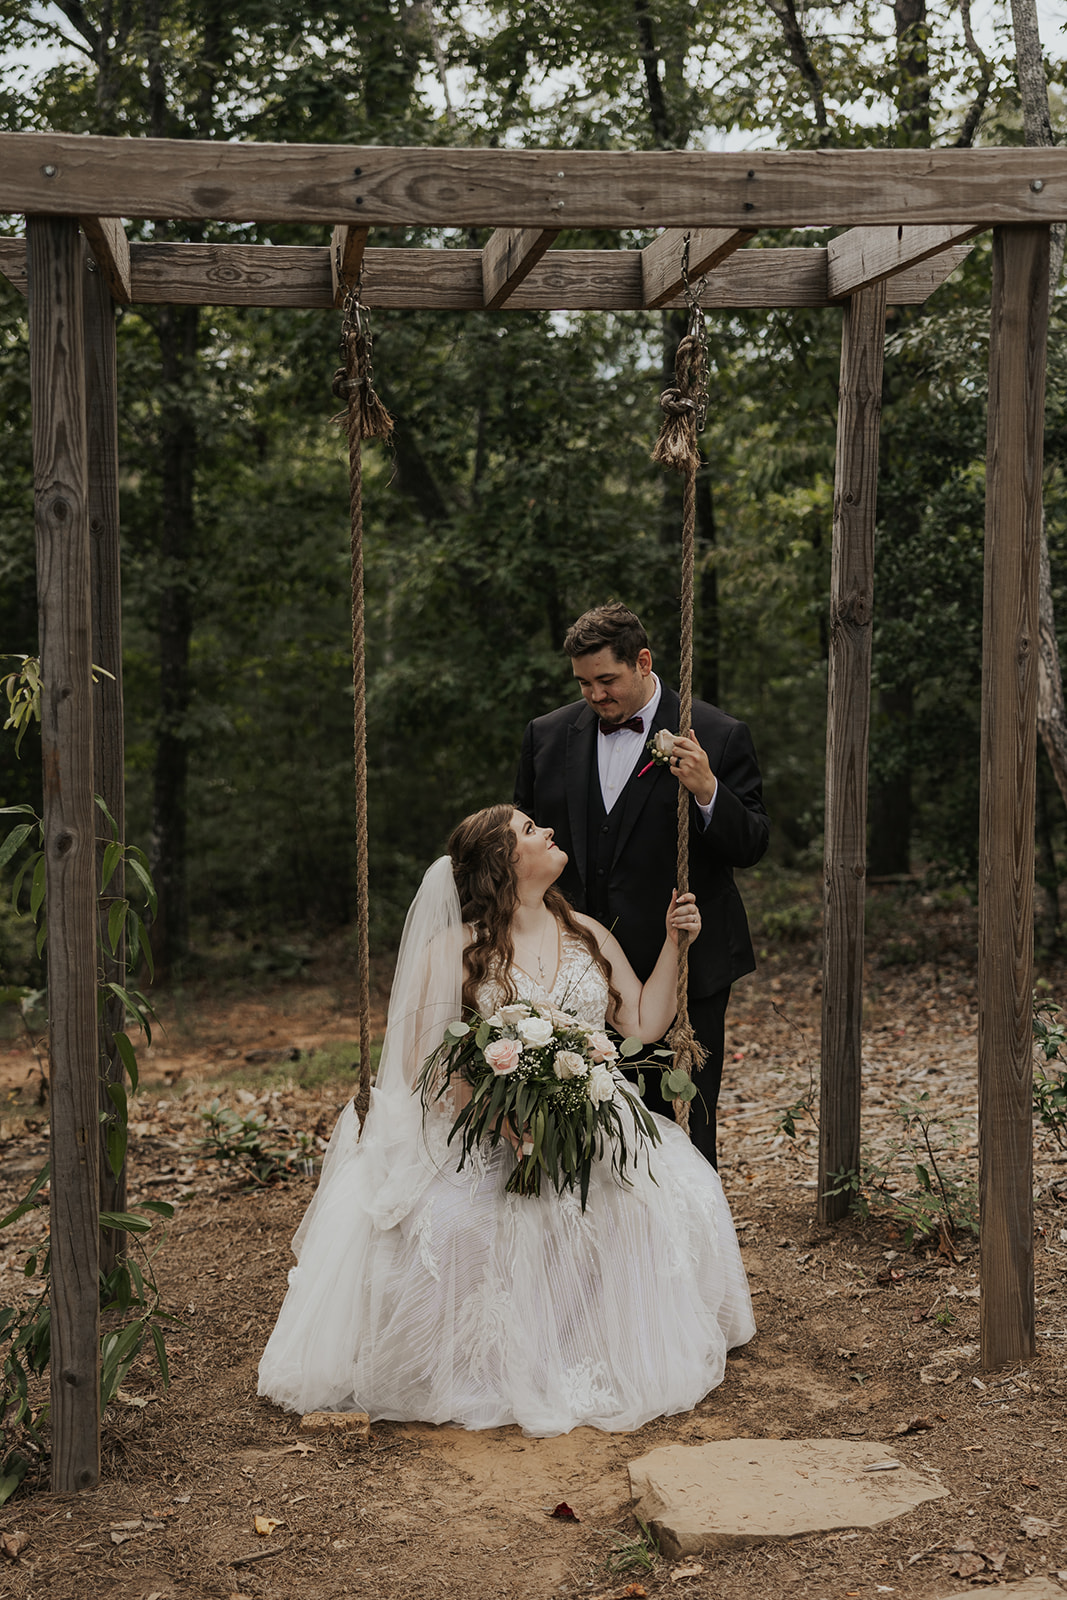 Stunning bride and groom share a moment in the trees outside their Georgia wedding venue